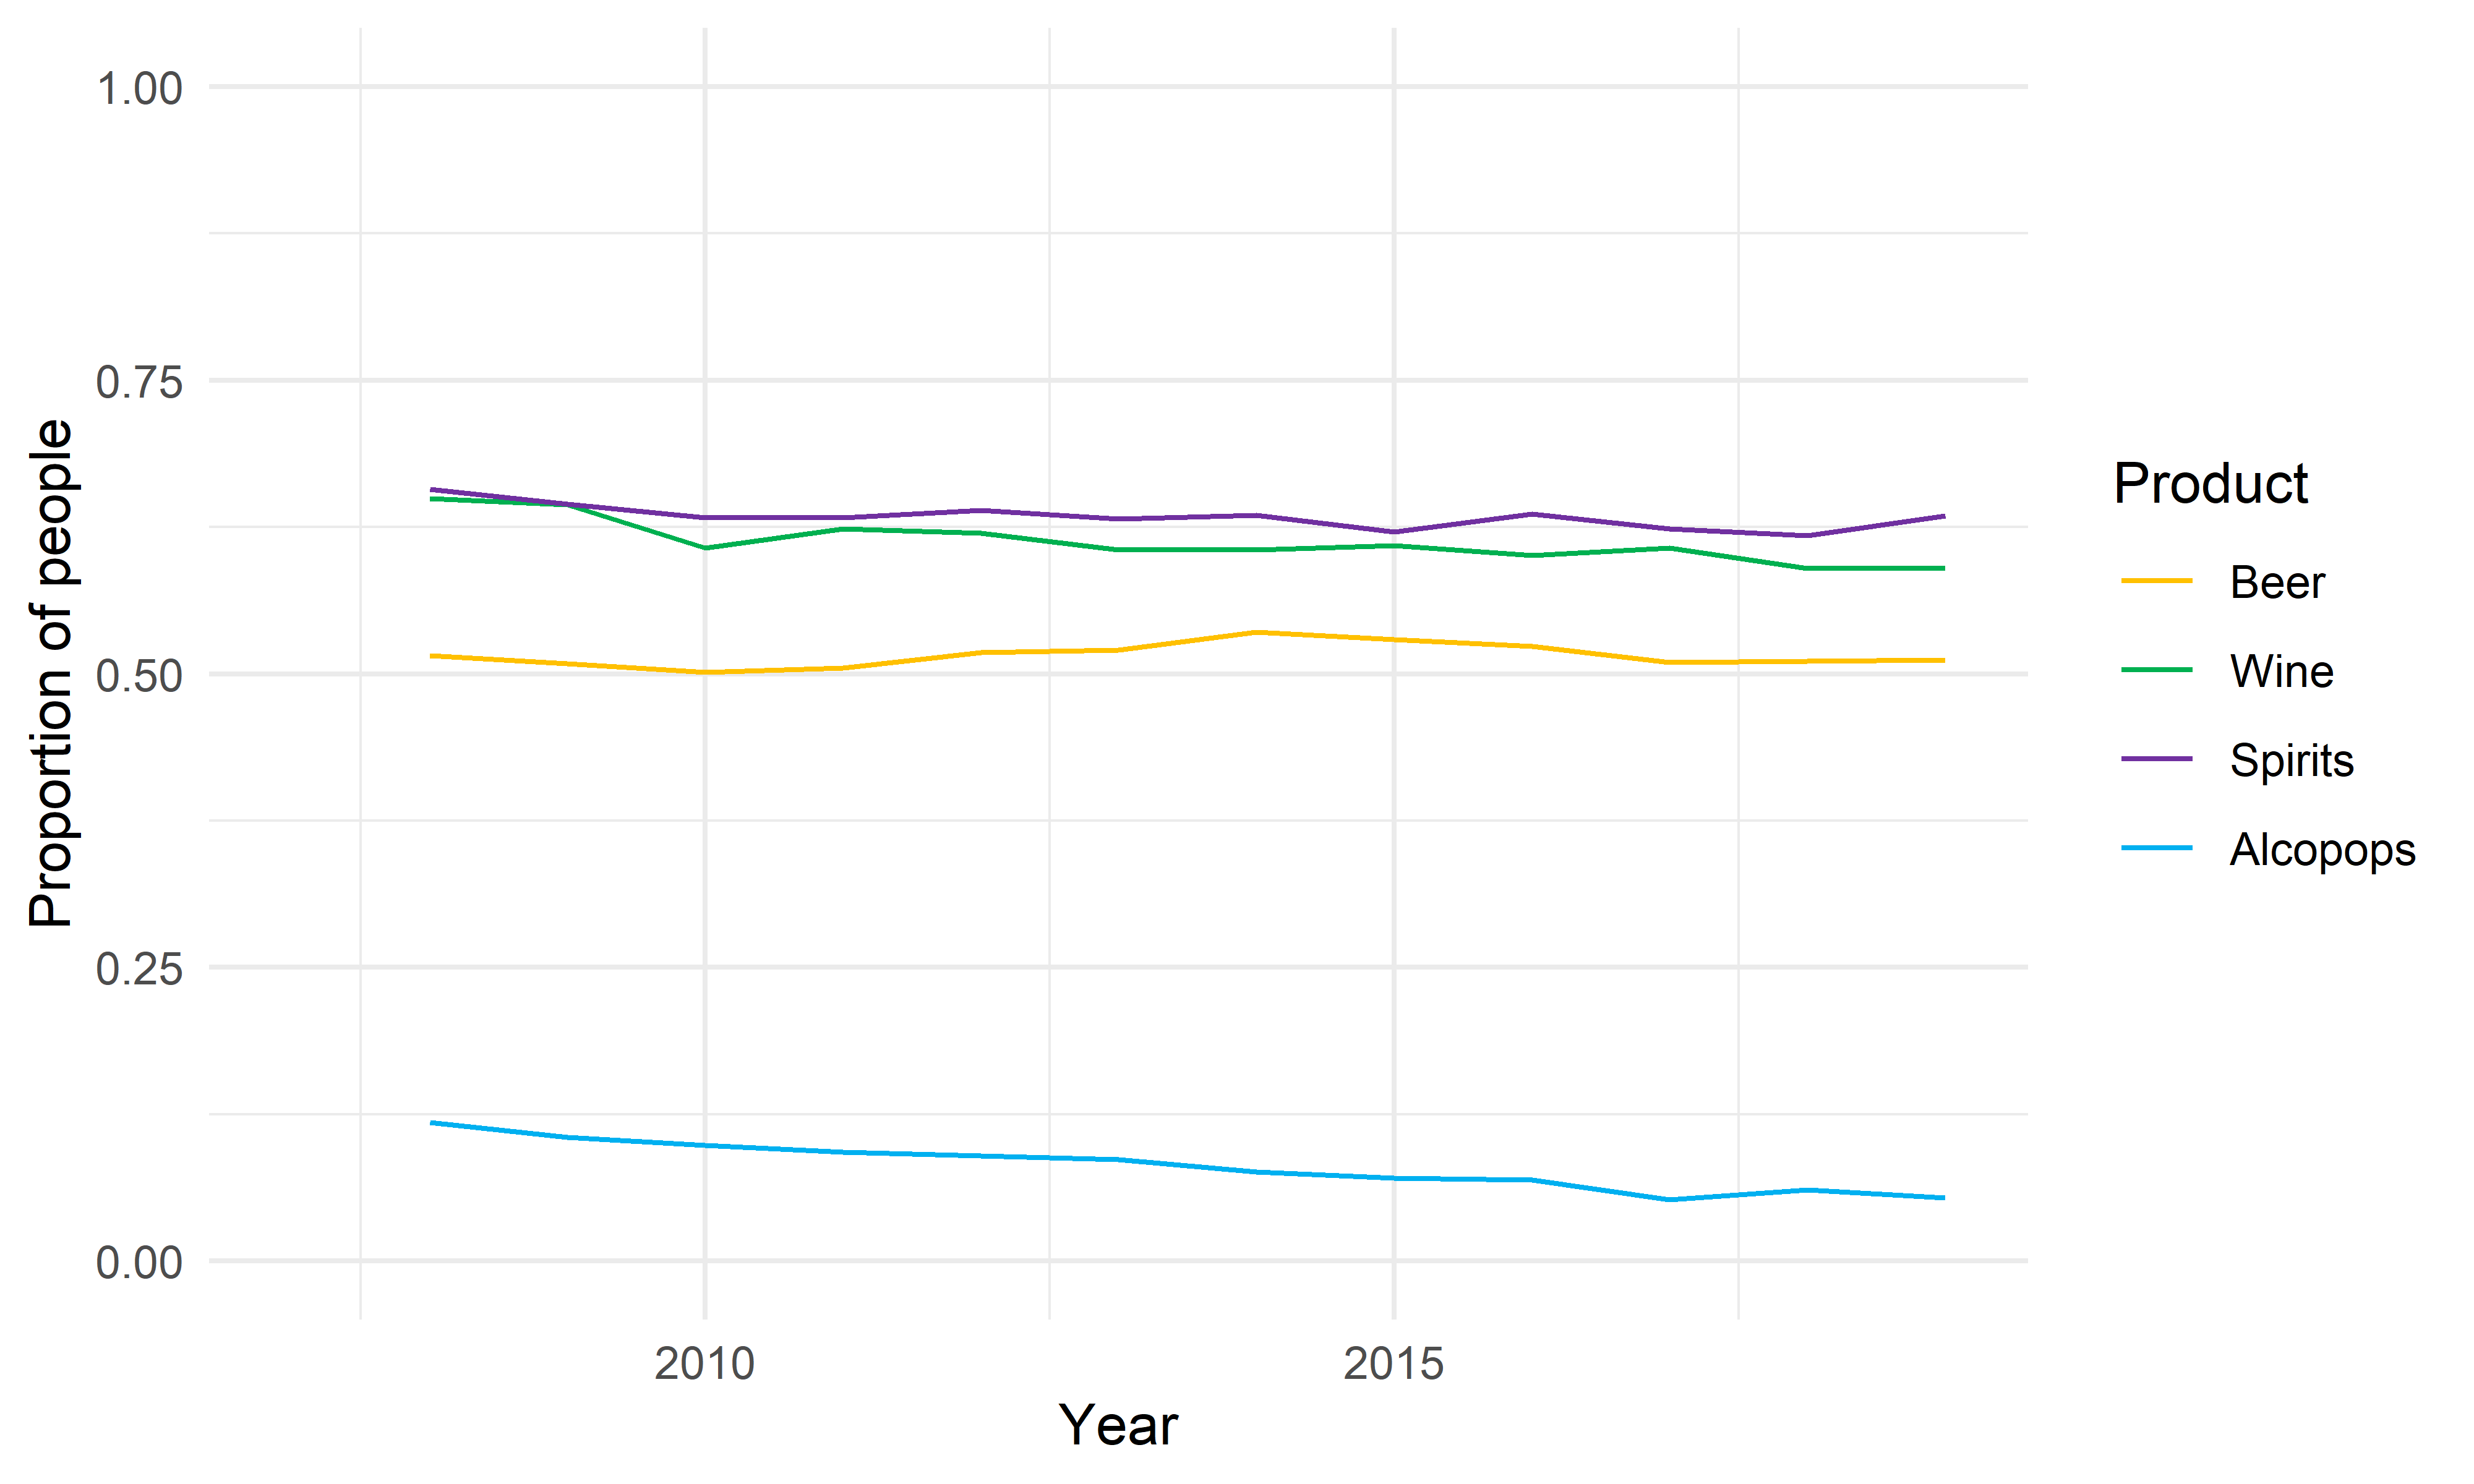 Figure 20. Calendar year trends in the proportions of people who drink each type of alcoholic drink.